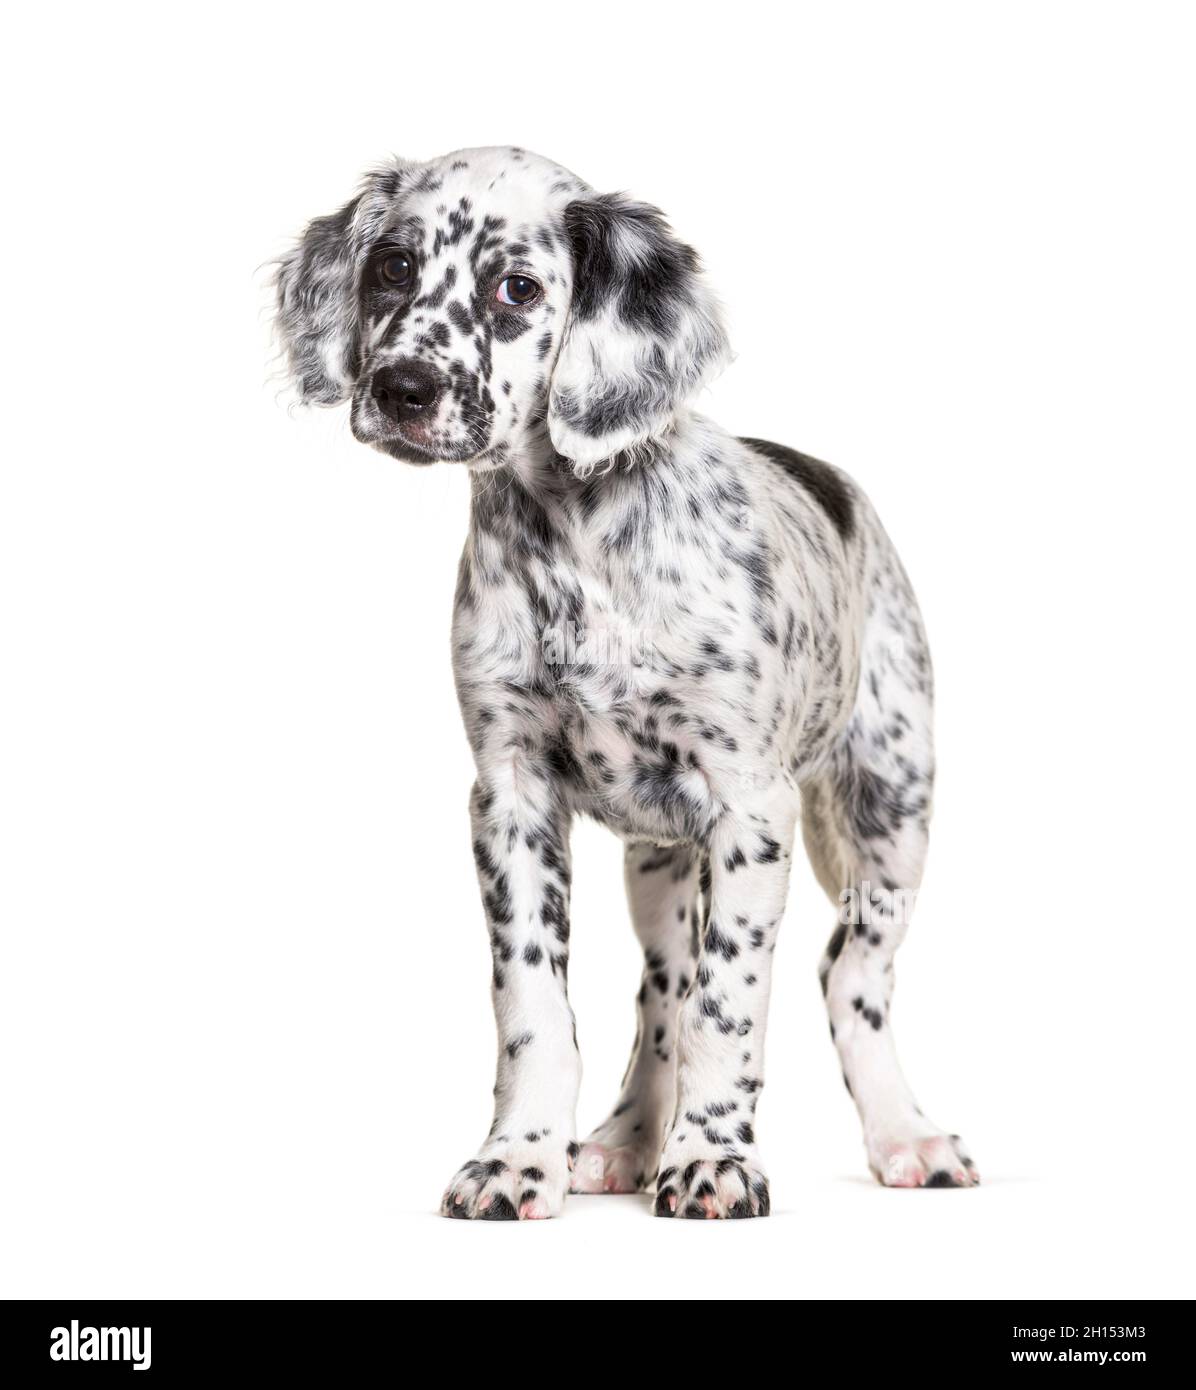 Standing Puppy english setter dog spotted black and white, two months old, Isolated Stock Photo